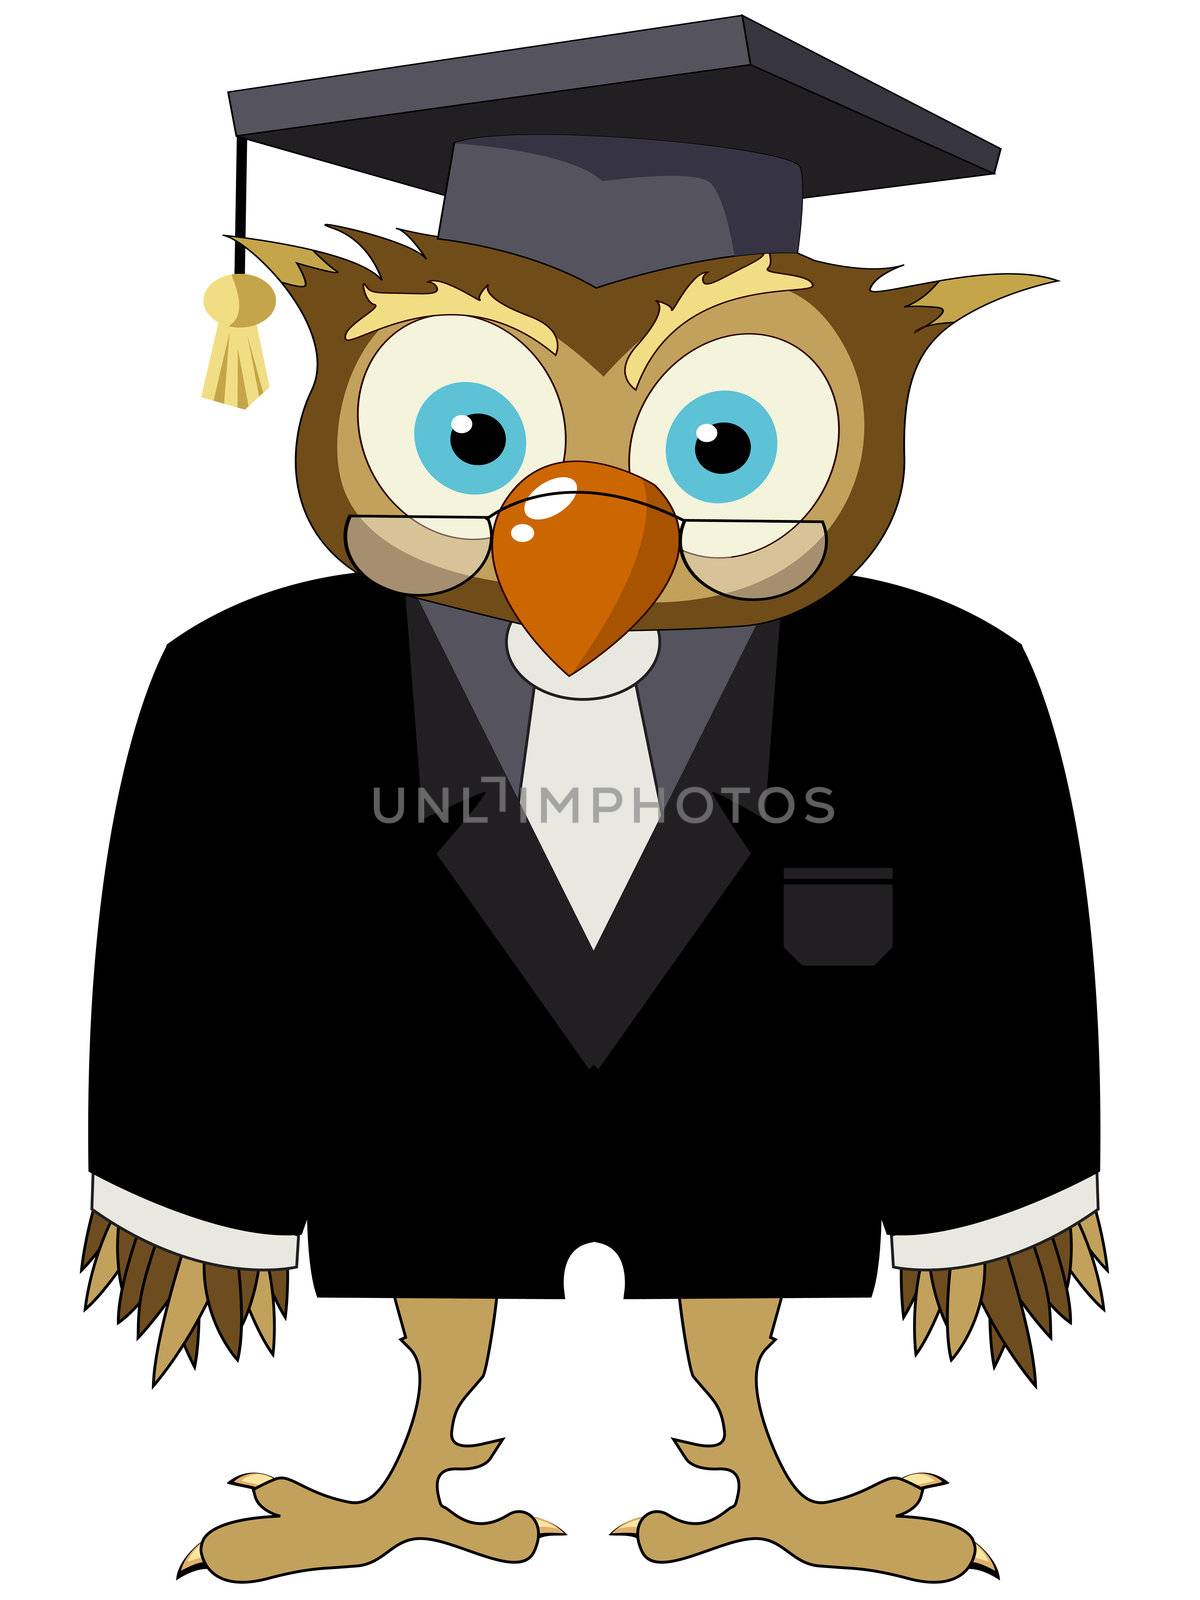 Cartoon drawing of a owl in a suit with graduate hat and glasses